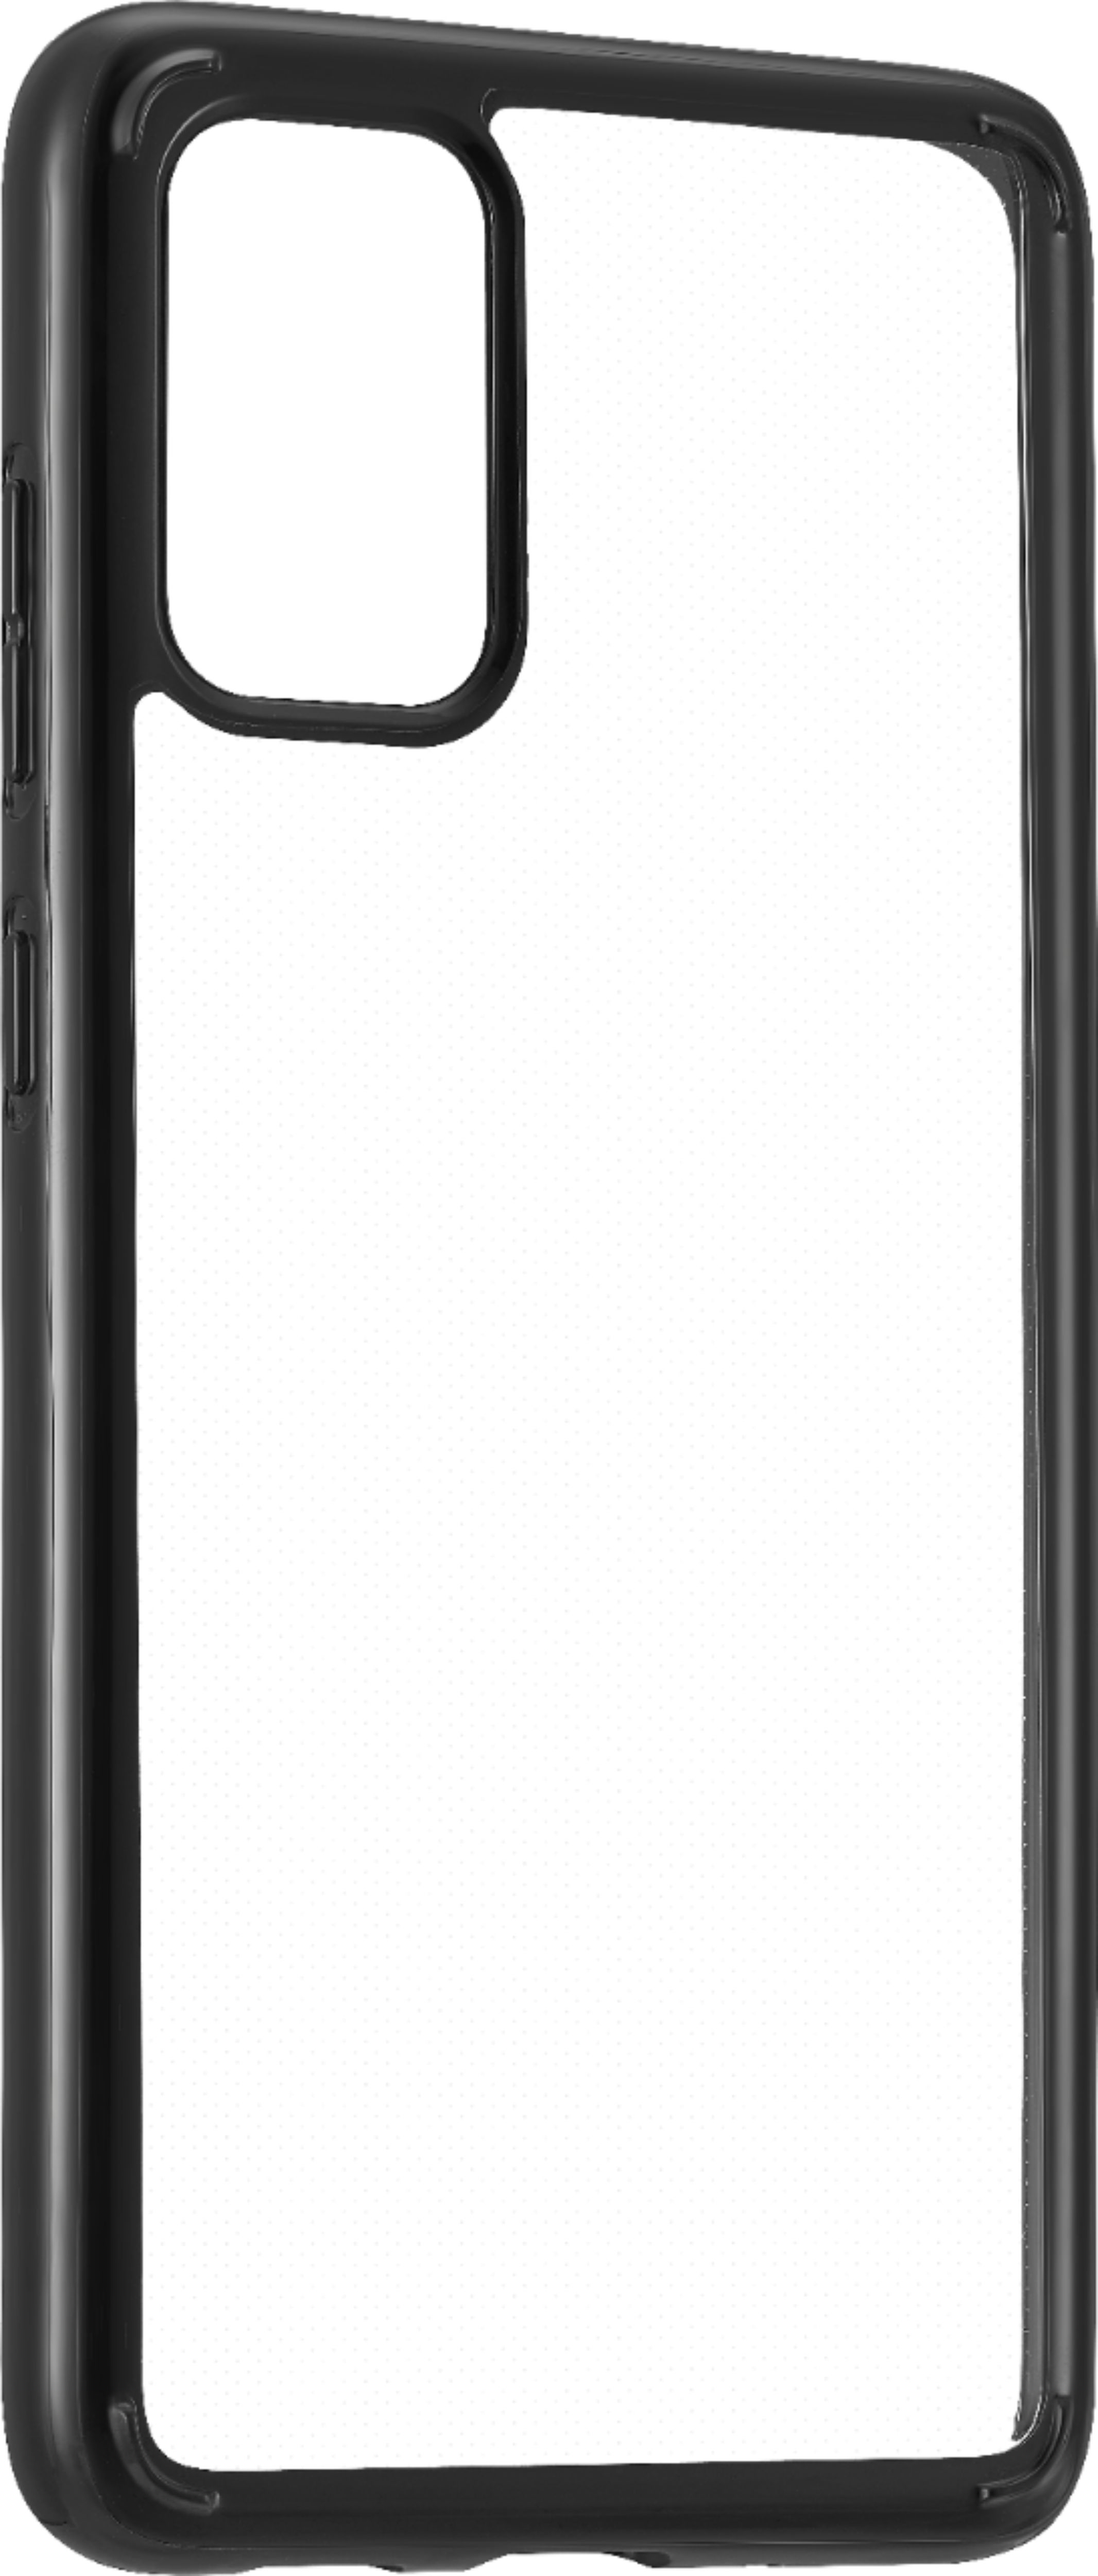 Angle View: Insignia™ - Hard Shell Case for Samsung Galaxy S20+ 5G - Black